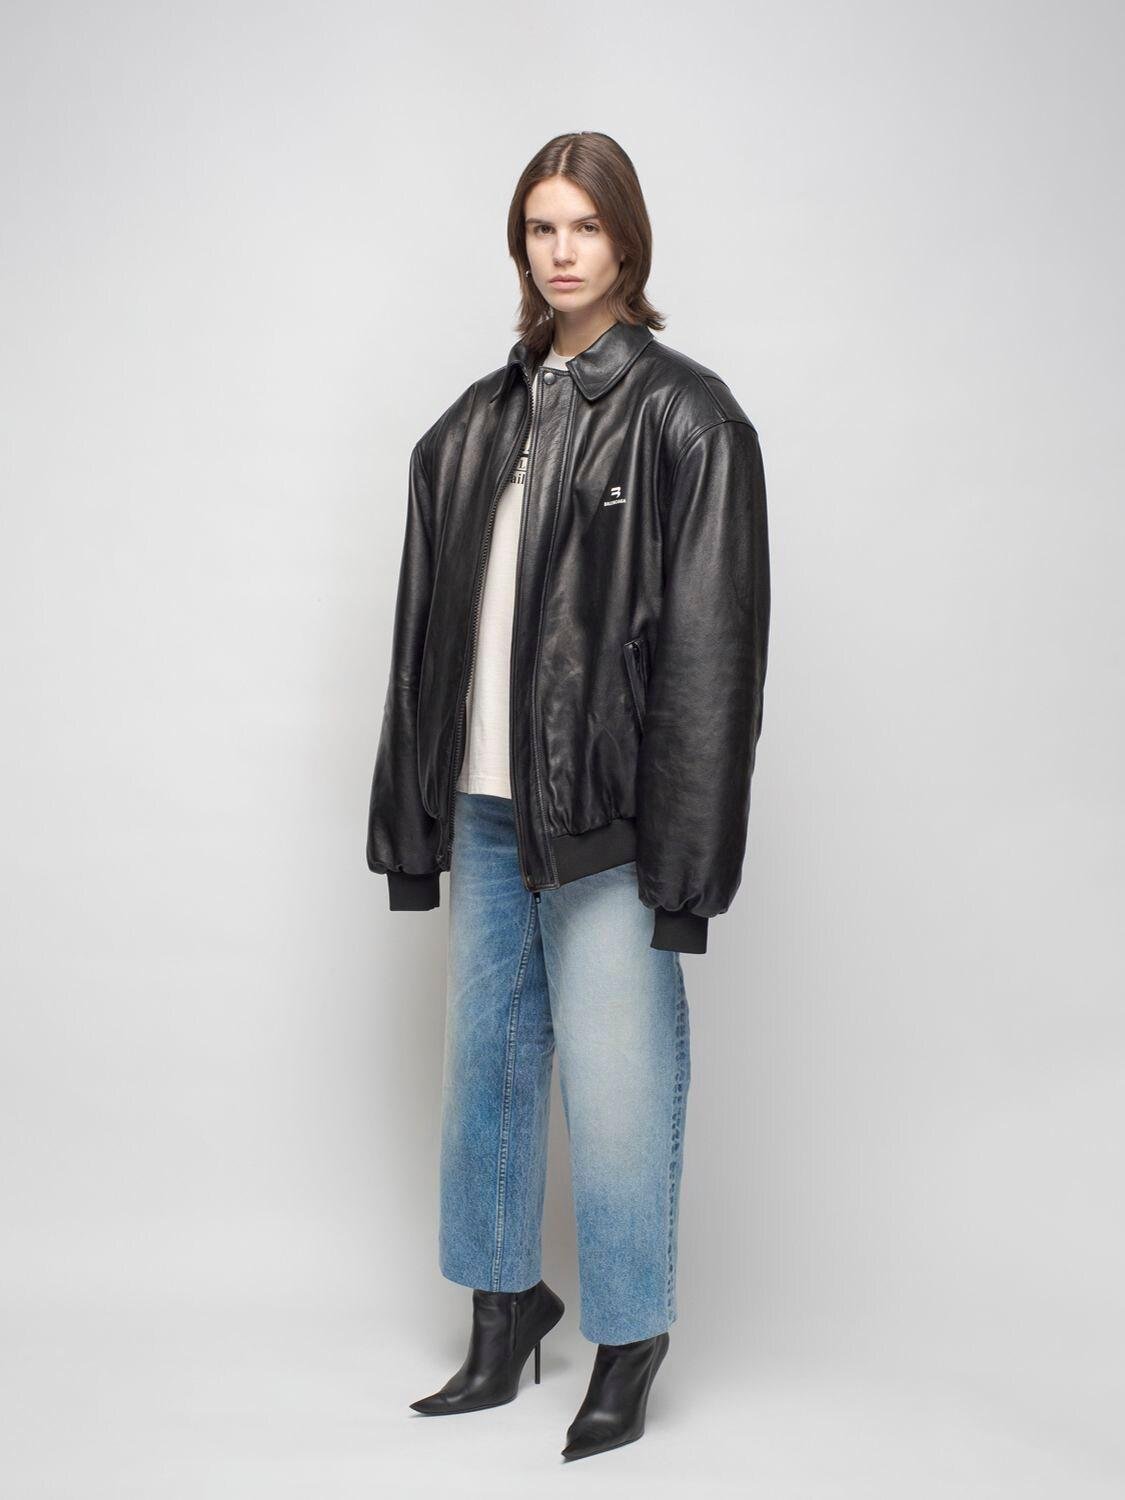 Balenciaga Taxi Leather Bomber Jacket in Black | Lyst